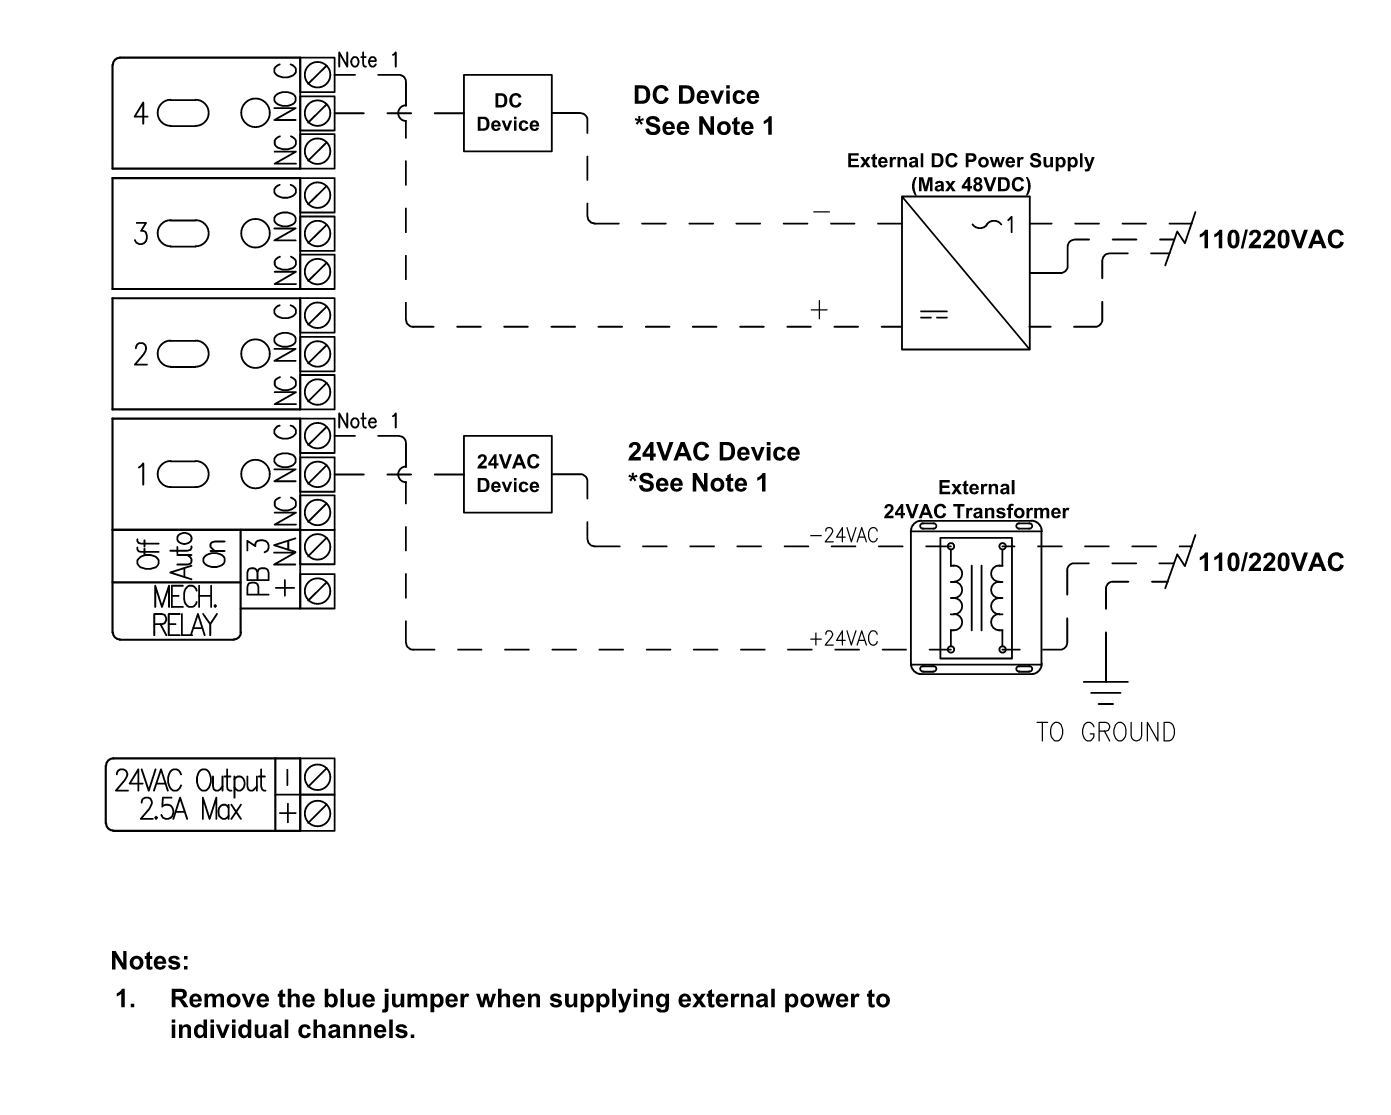 A diagram of a power supply system

Description automatically generated with low confidence